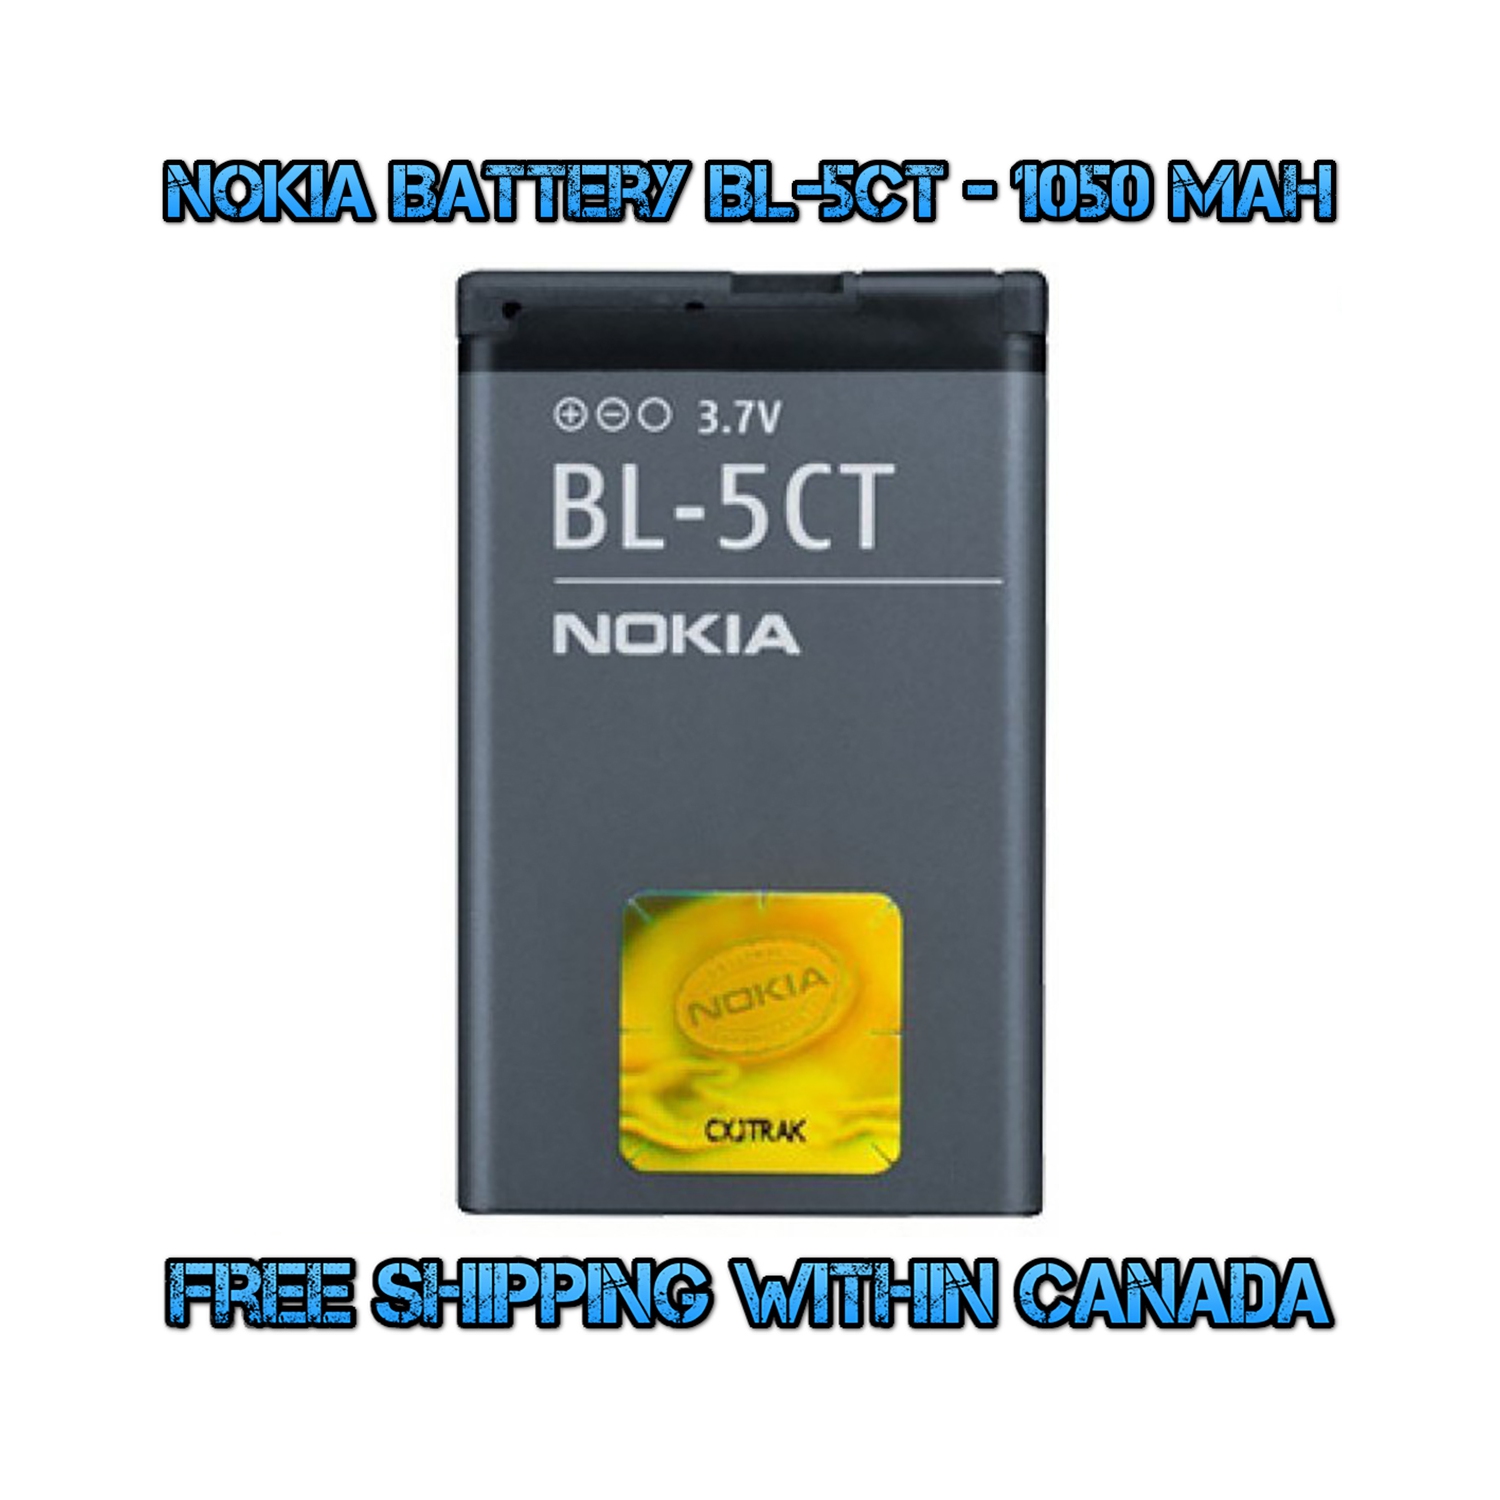 New OEM Replacement Battery Model BL-5CT 1050 mAh for Nokia C3 X3 3720 5220 5310 6730 7510 - (FREE SHIPPING)